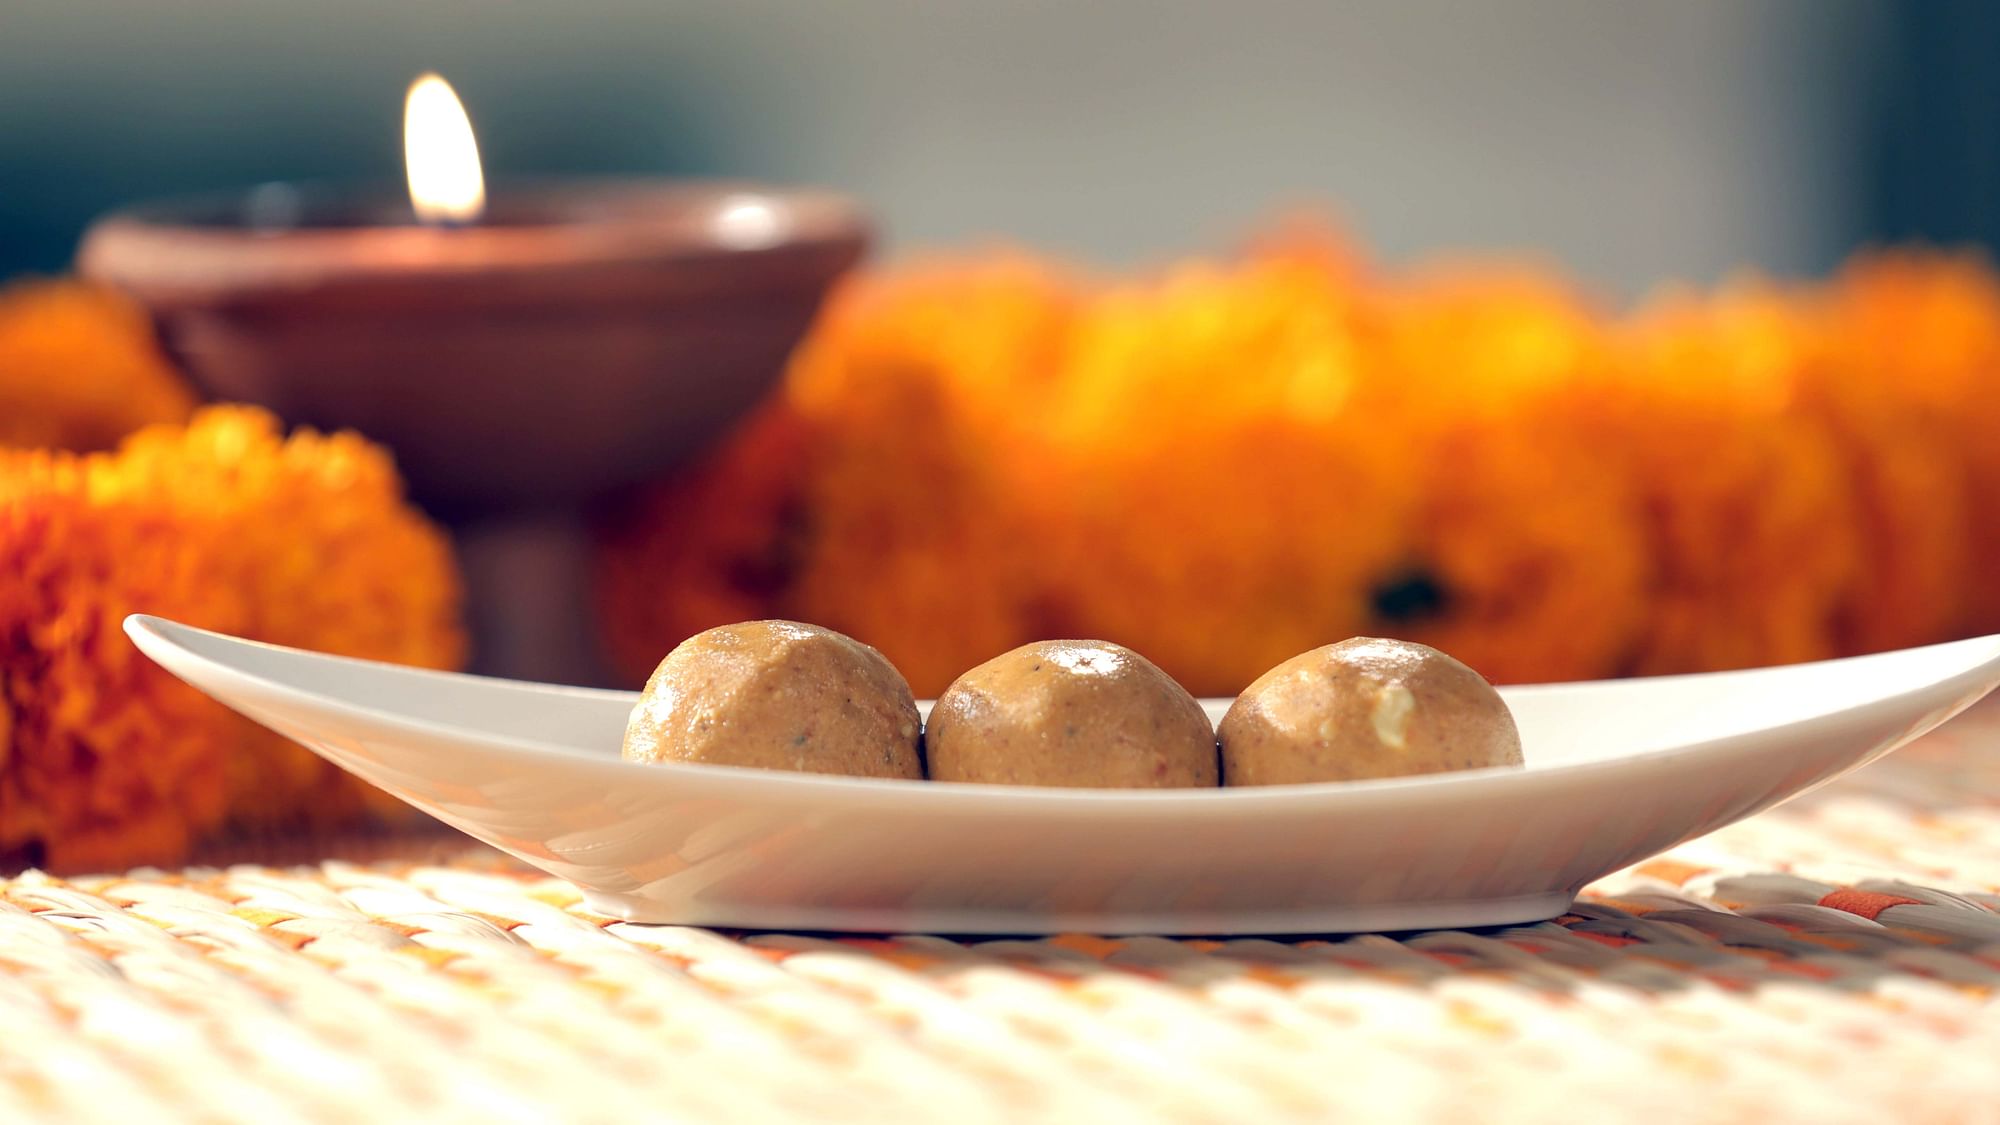 Celebrate Diwali with these homemade Besan Ladoos. (Photo: The Quint)